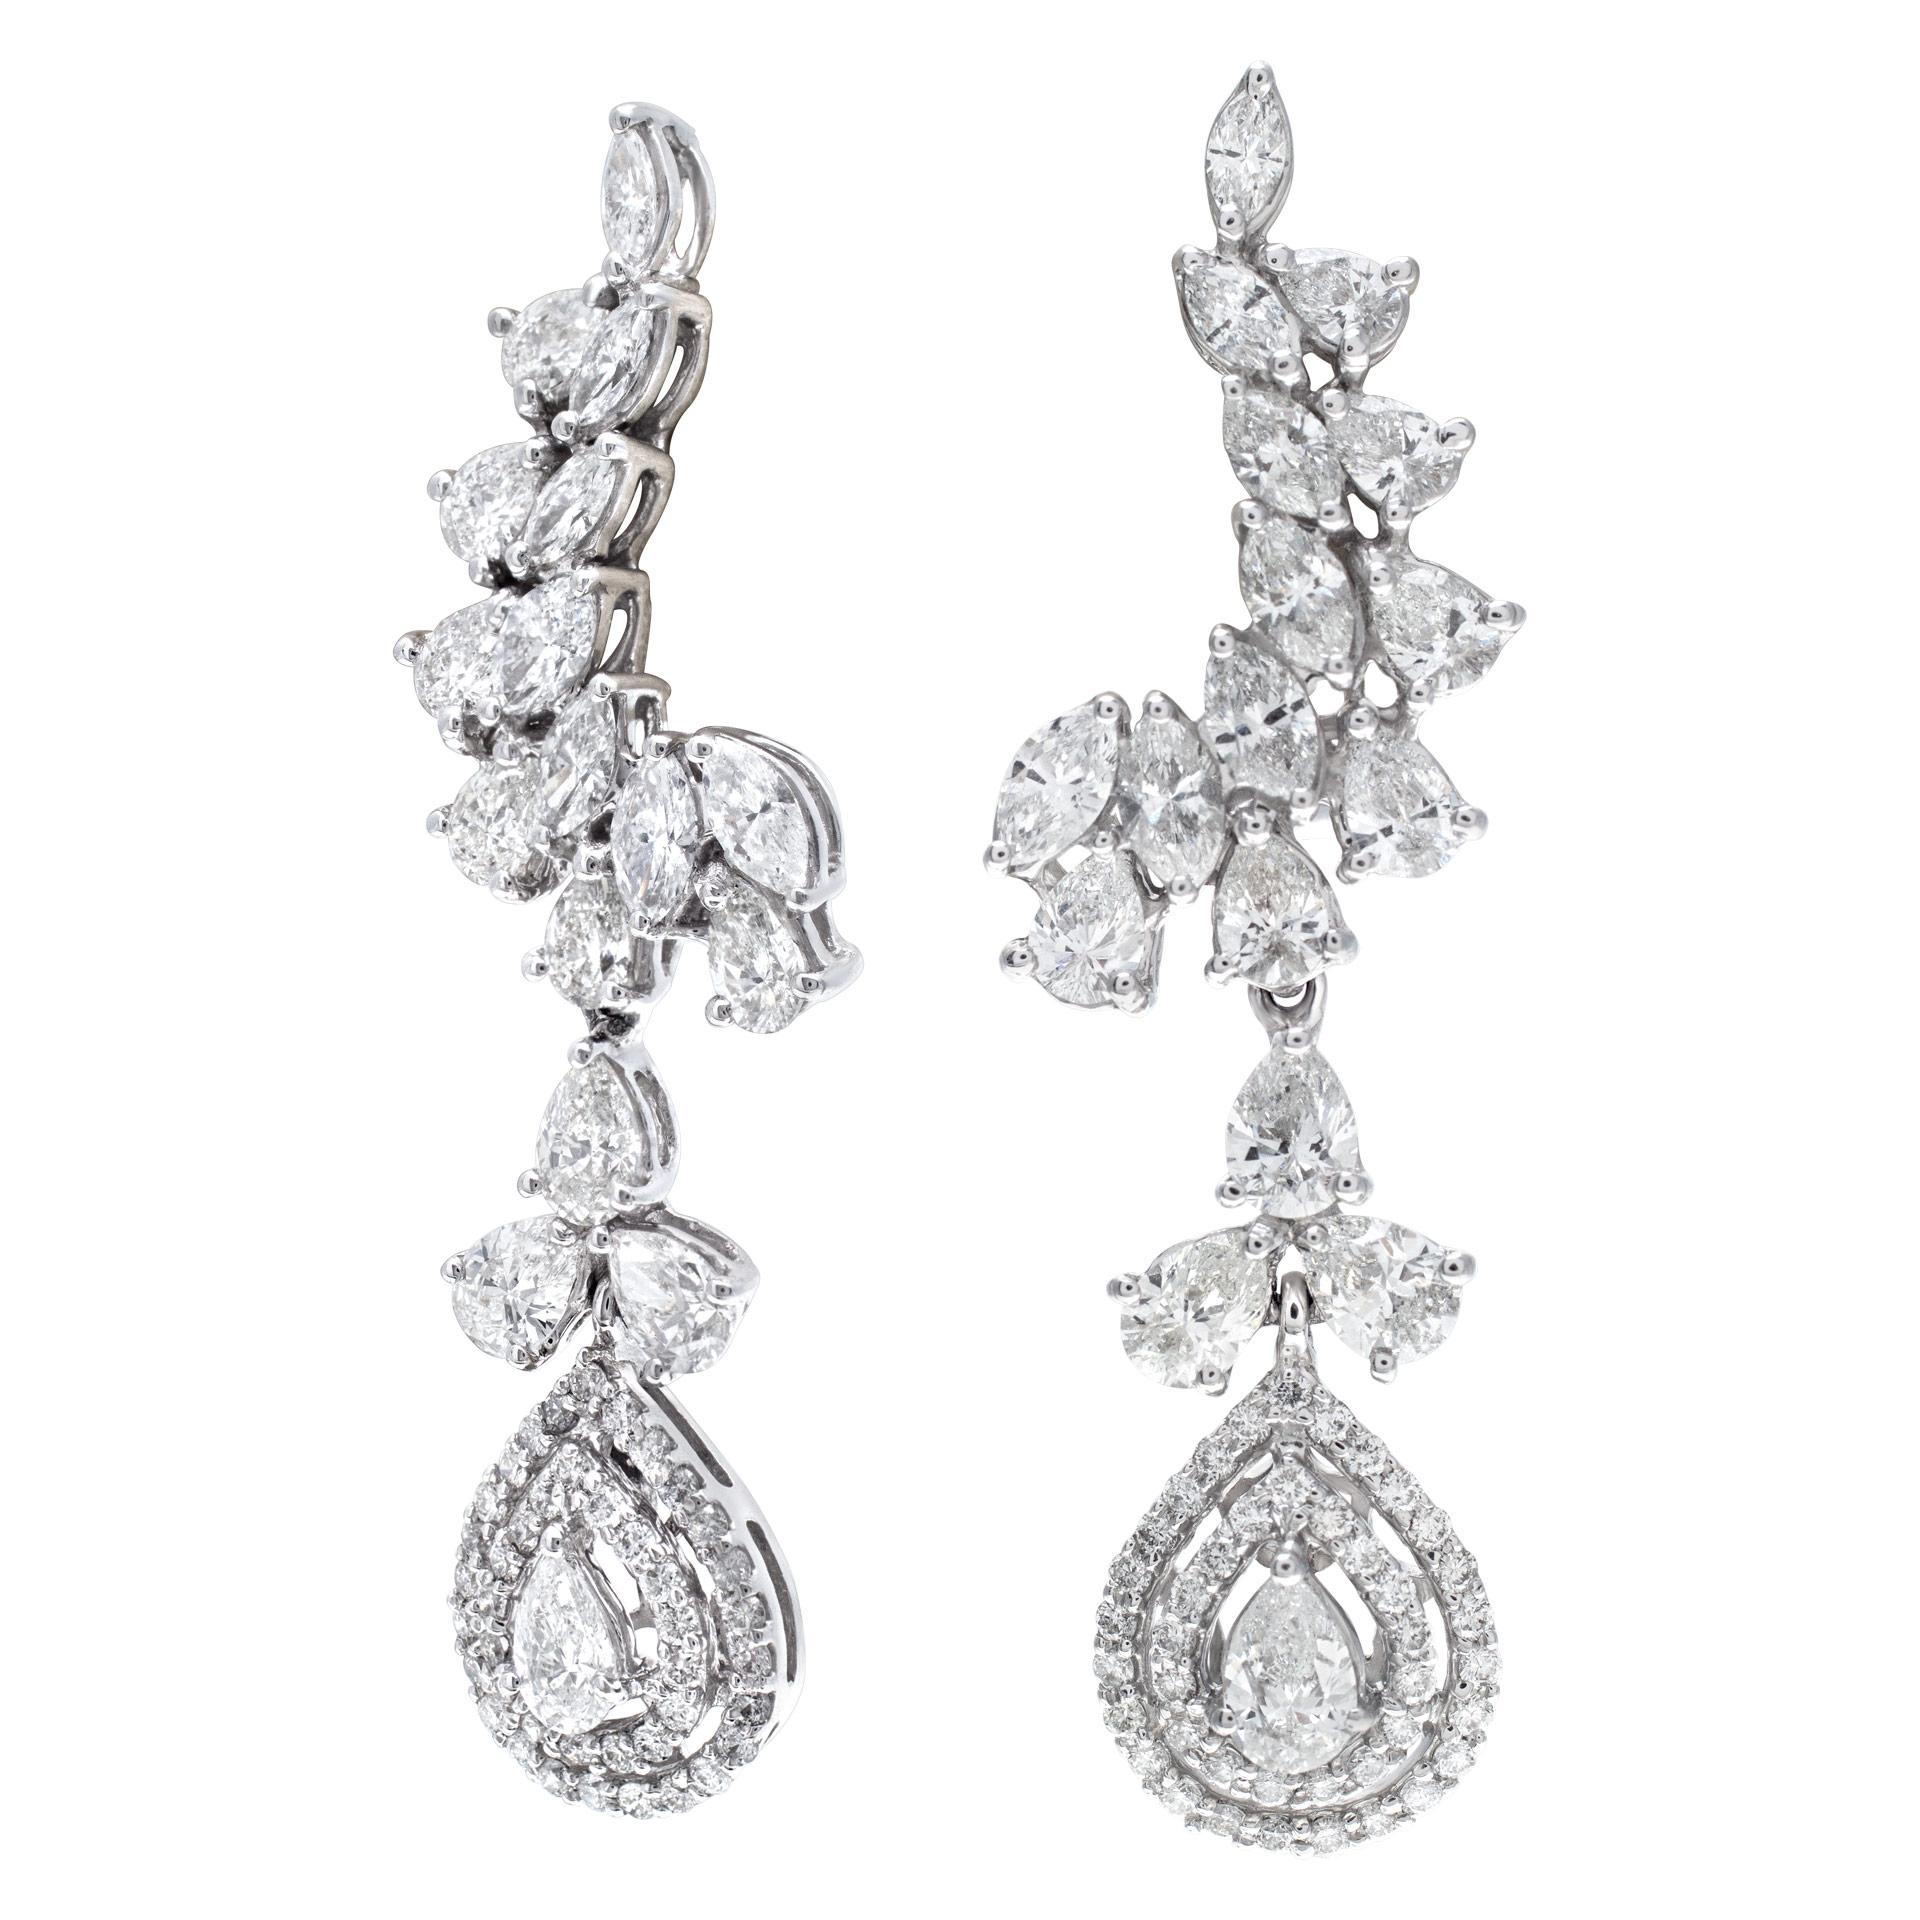 Drop earrings in 18k white gold For Sale at 1stDibs